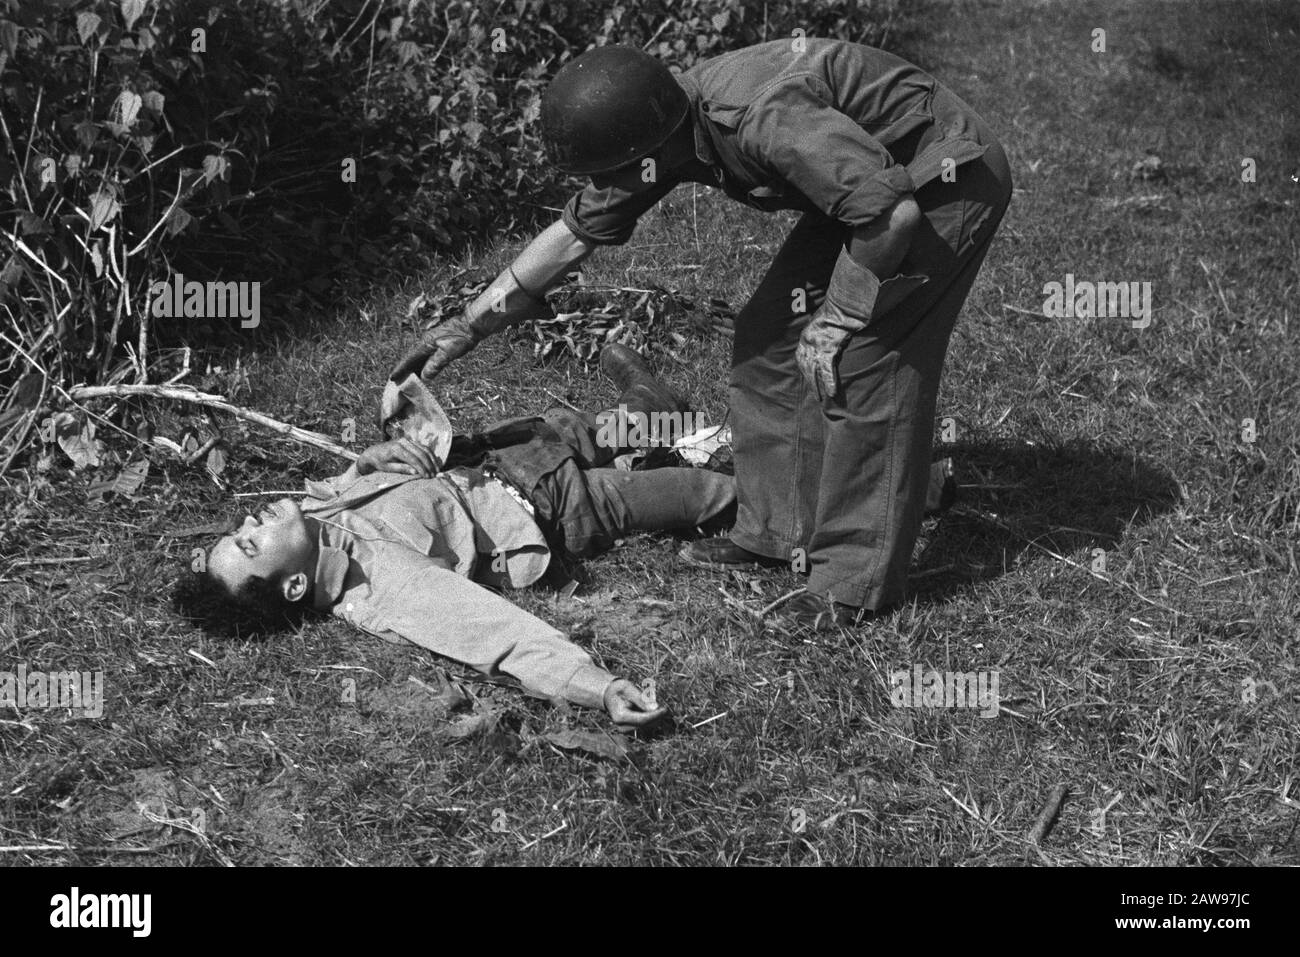 Loeboek Pakem and Baoengan  Dutch soldier bends over corpse of a Republican streider and raises his gloved hand a slip of a shirt Date: July 29 1948 Location: Indonesia, Dutch East Indies, Sumatra Stock Photo